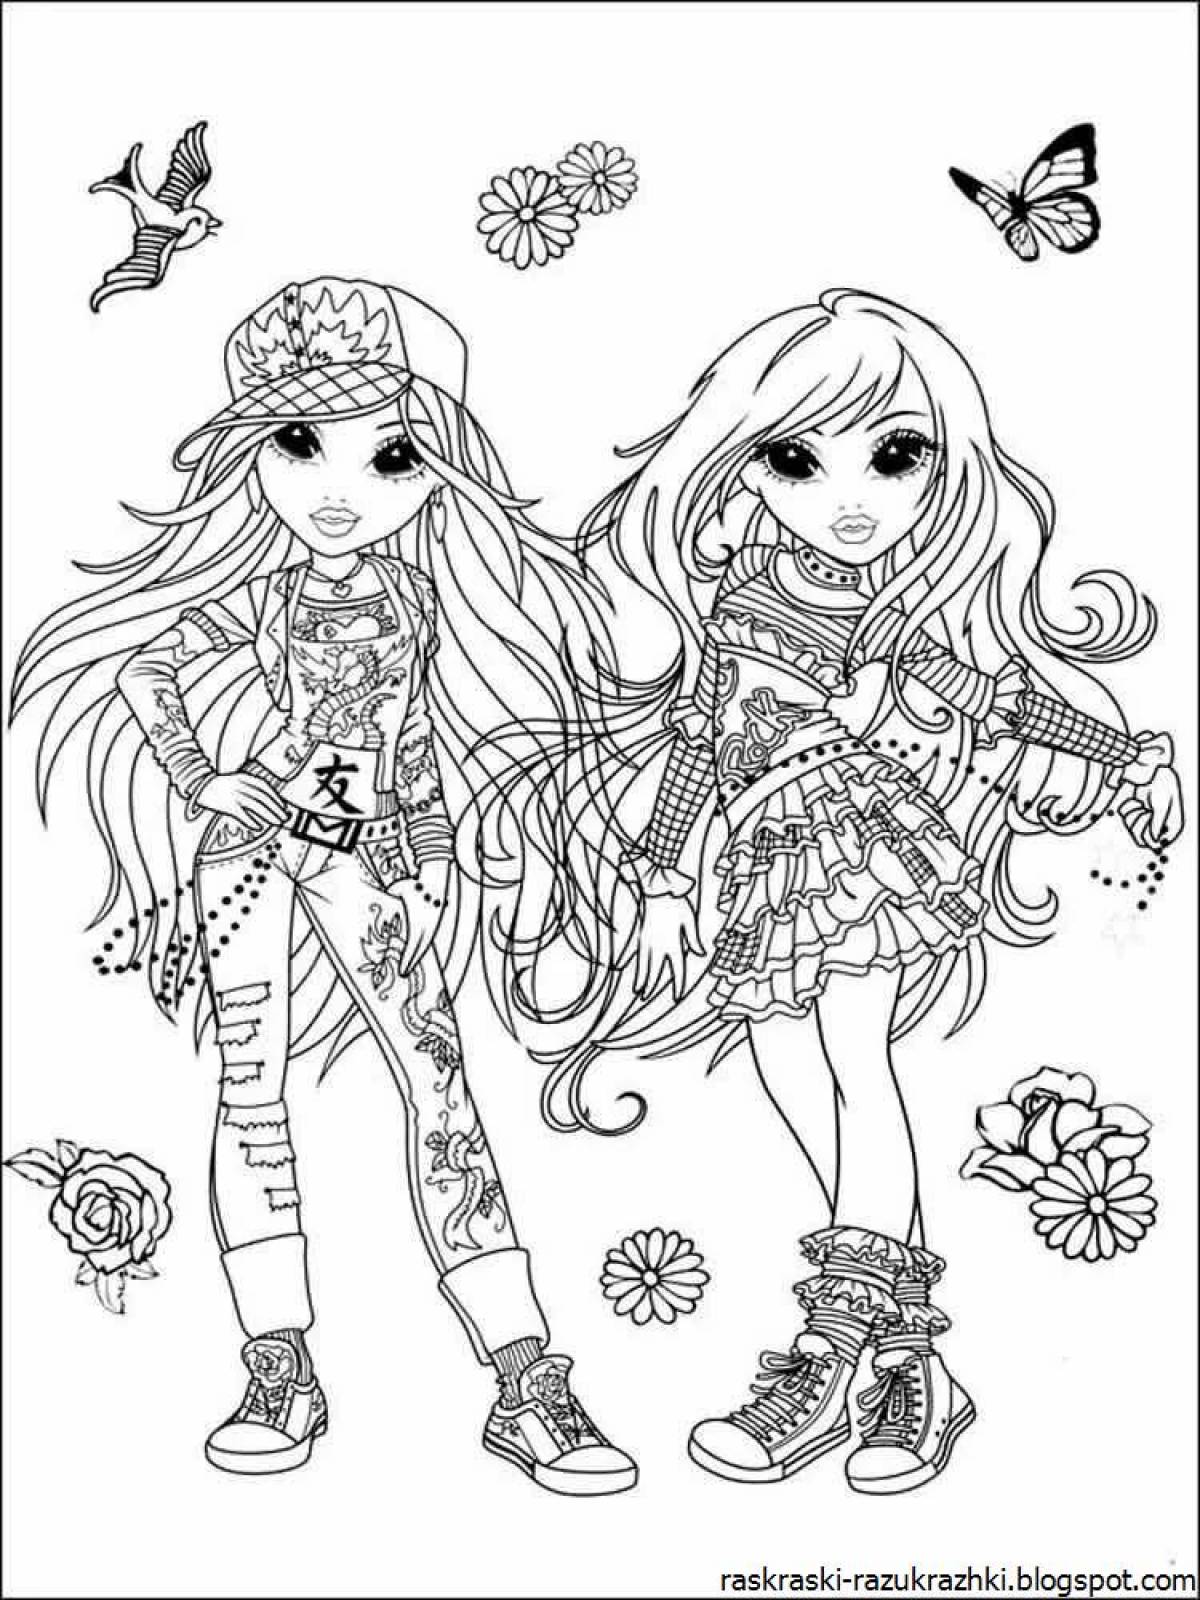 Fancy coloring for girls 10 years old